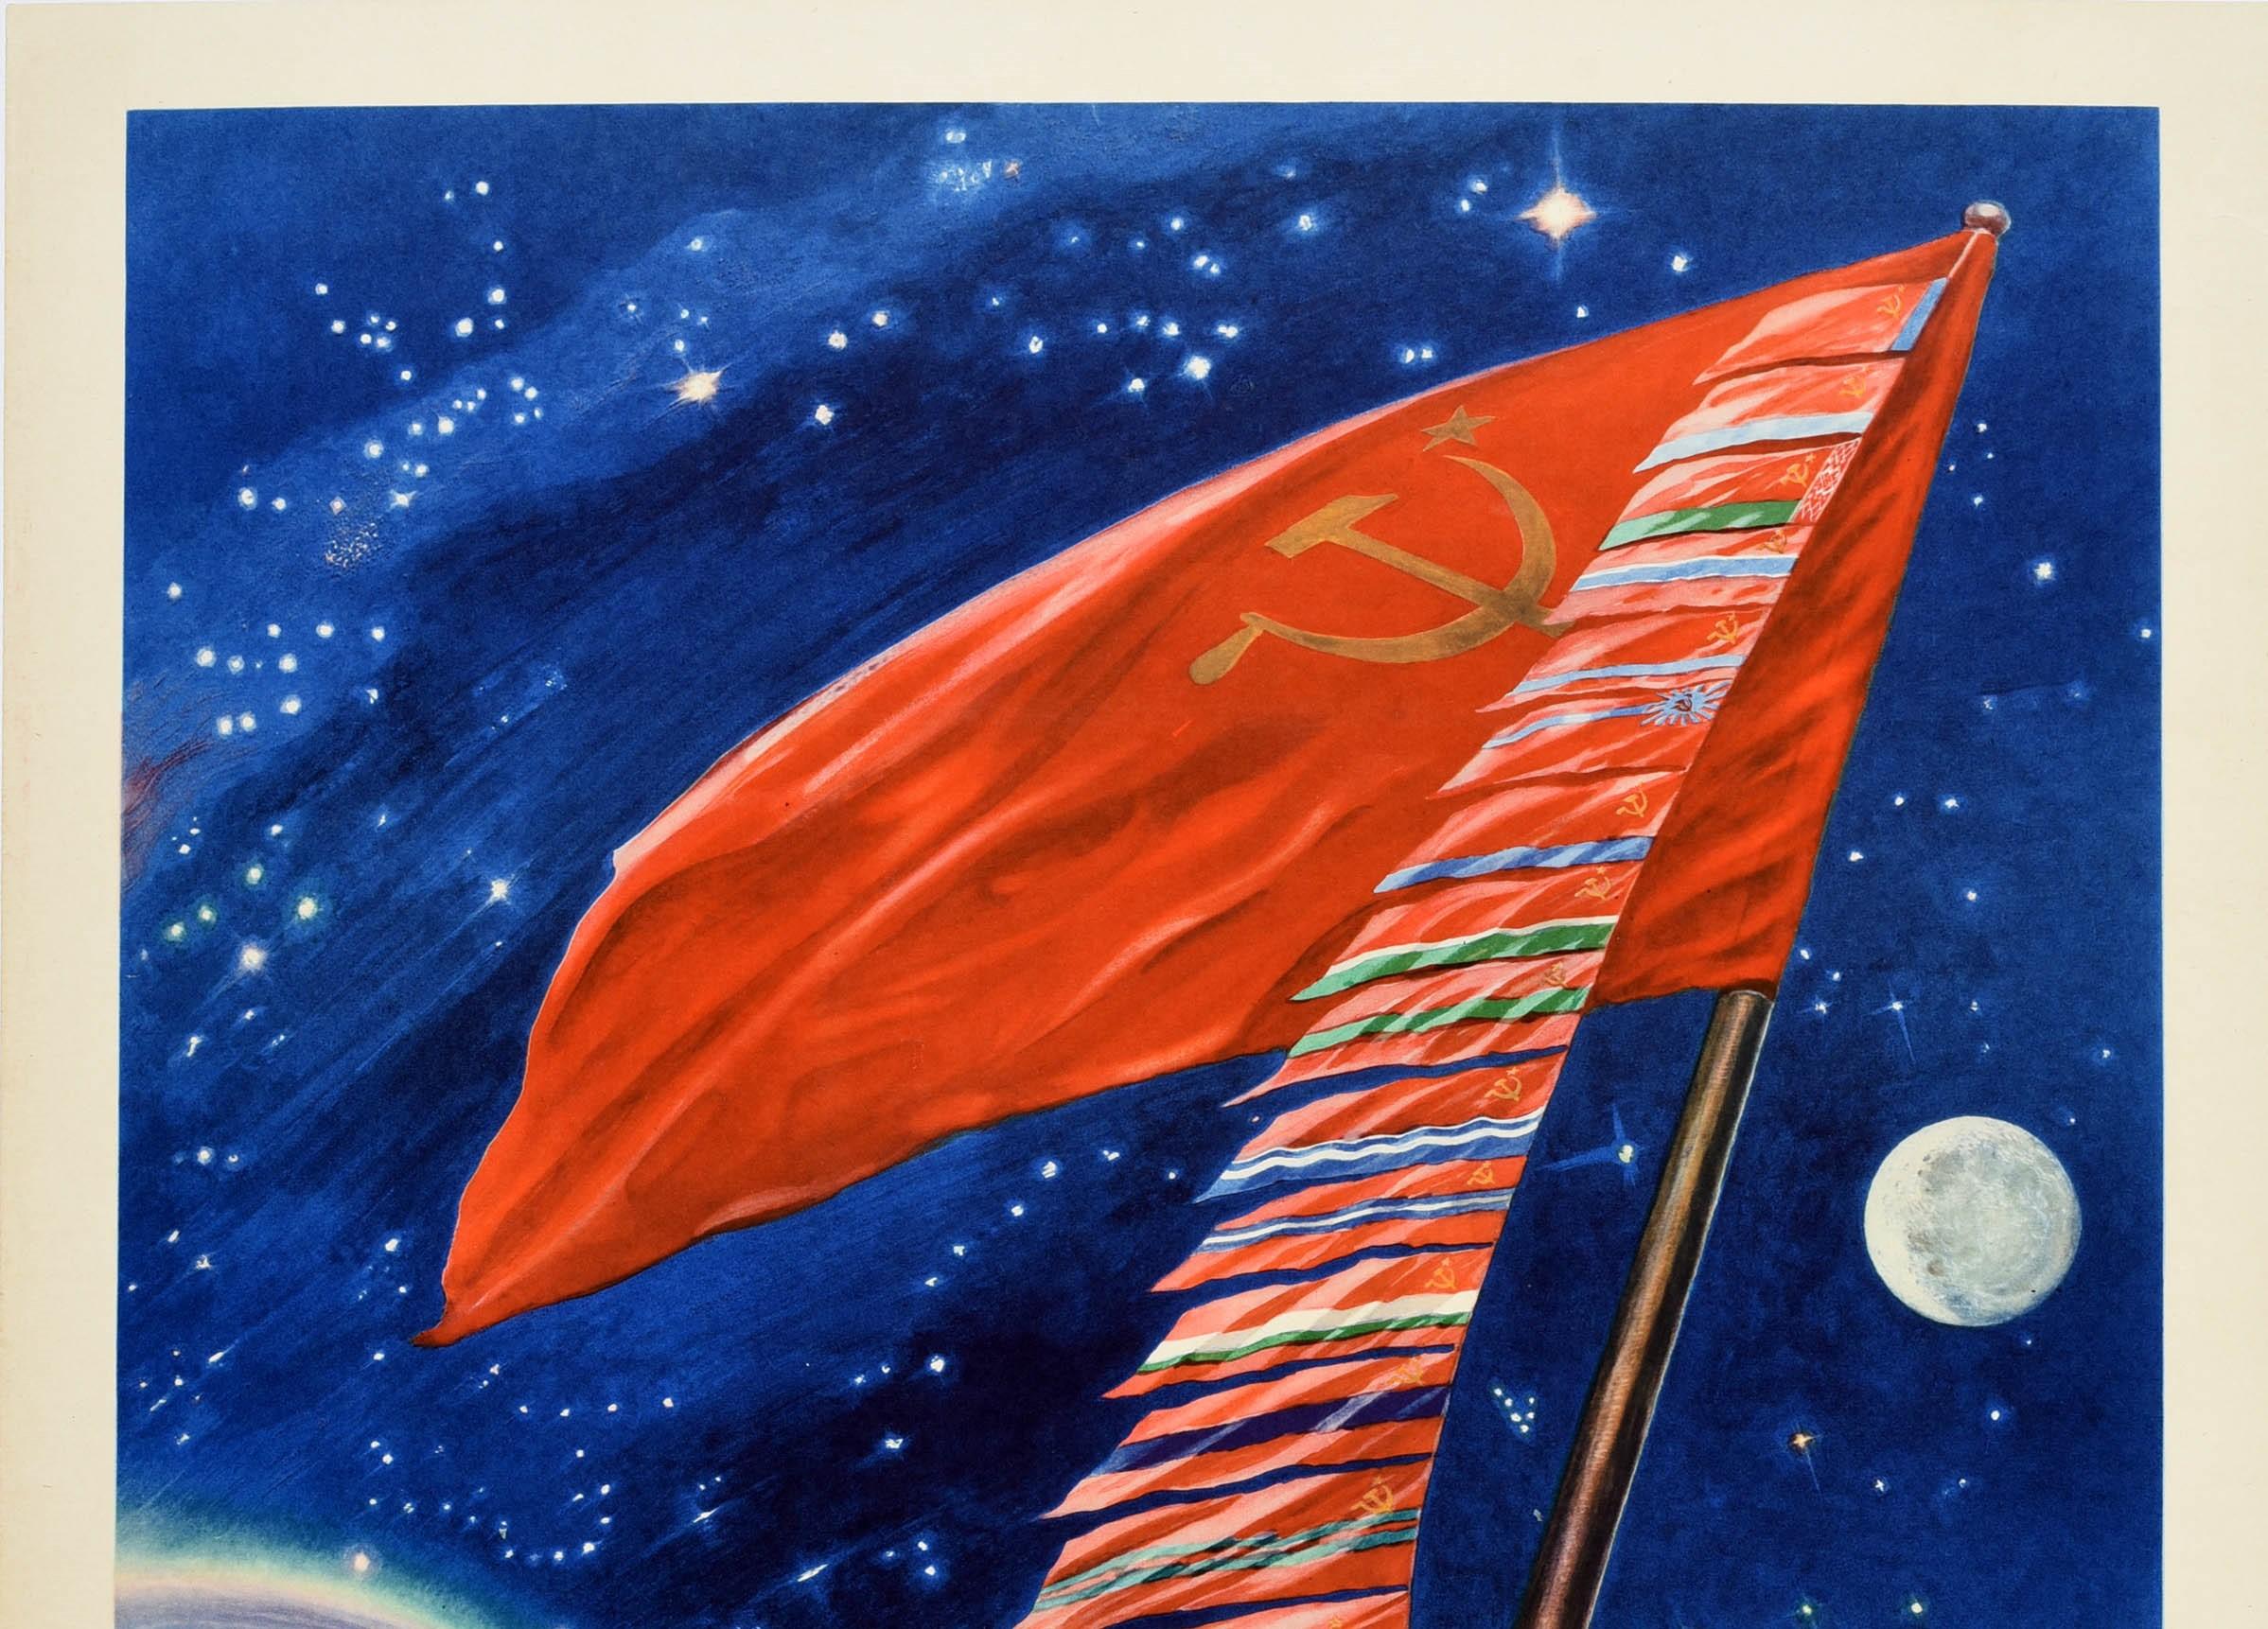 Original vintage Soviet space propaganda poster - Navigation In Open Space! / ????????? ? ??????? ??????! - featuring a spacecraft in orbit around planet earth with the hands of a man holding a red USSR flag with a hammer and sickle emblem on it and